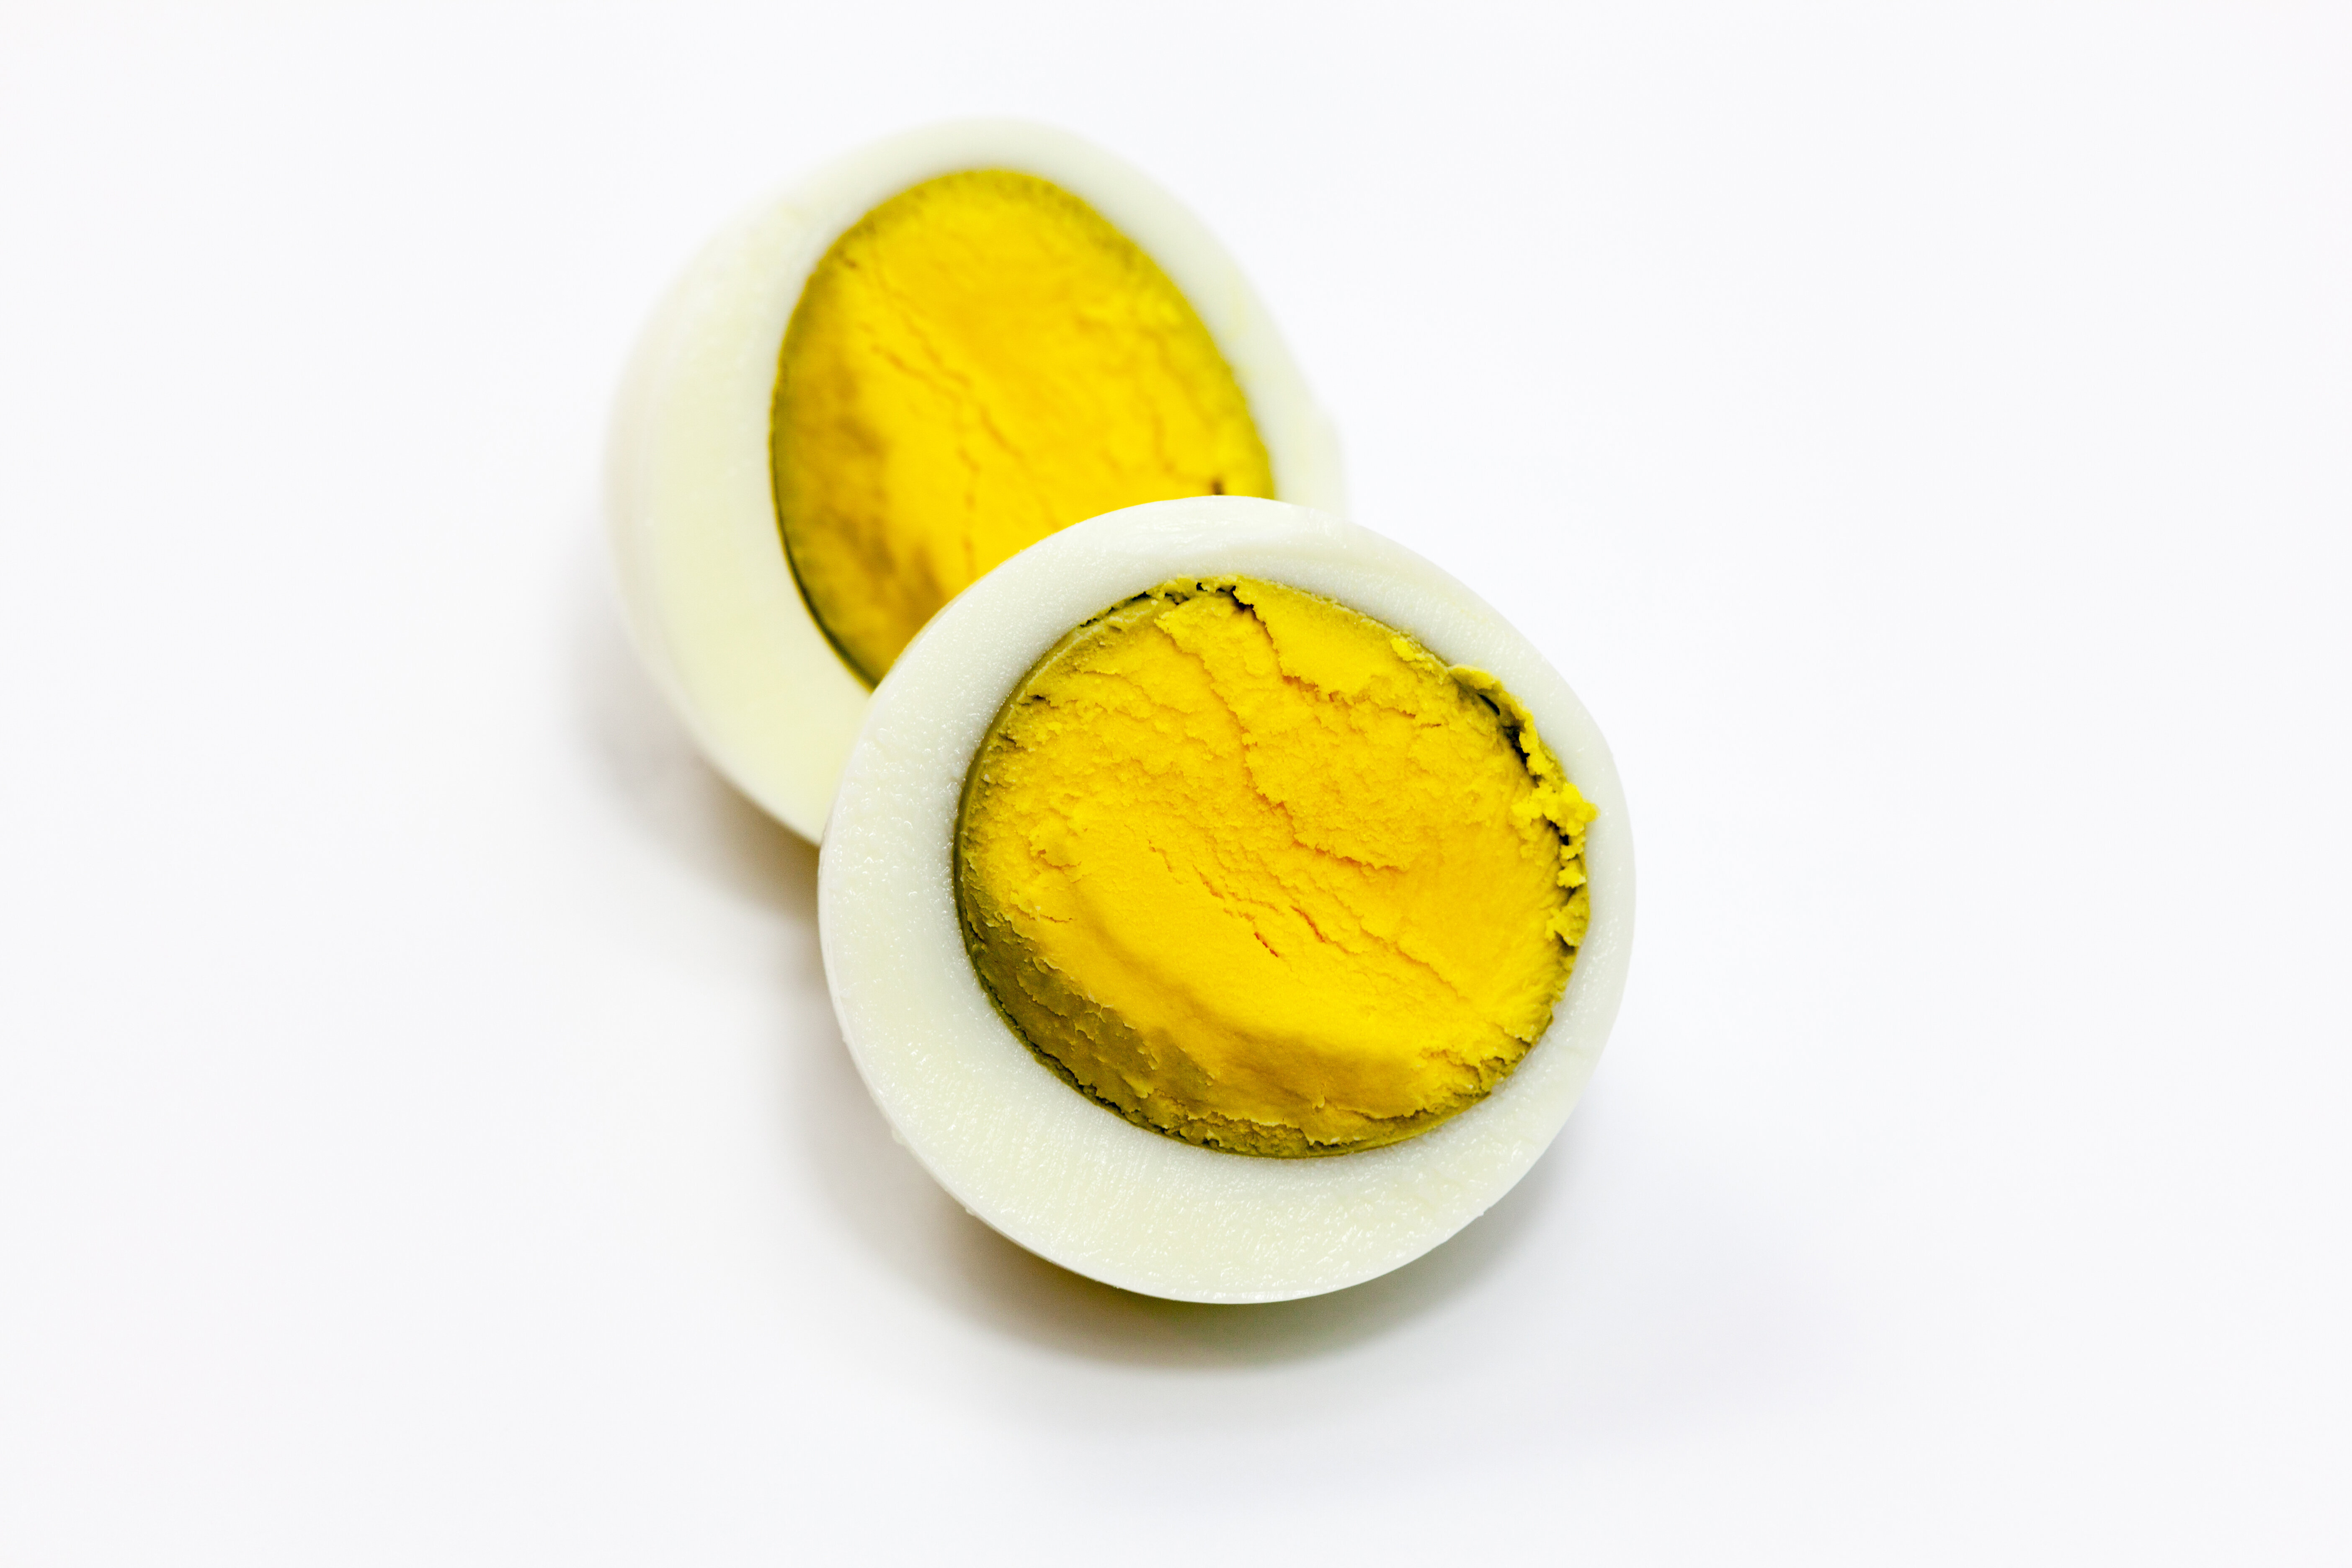 A hard-boiled egg with a dark ring around the yolk due to overcooking.